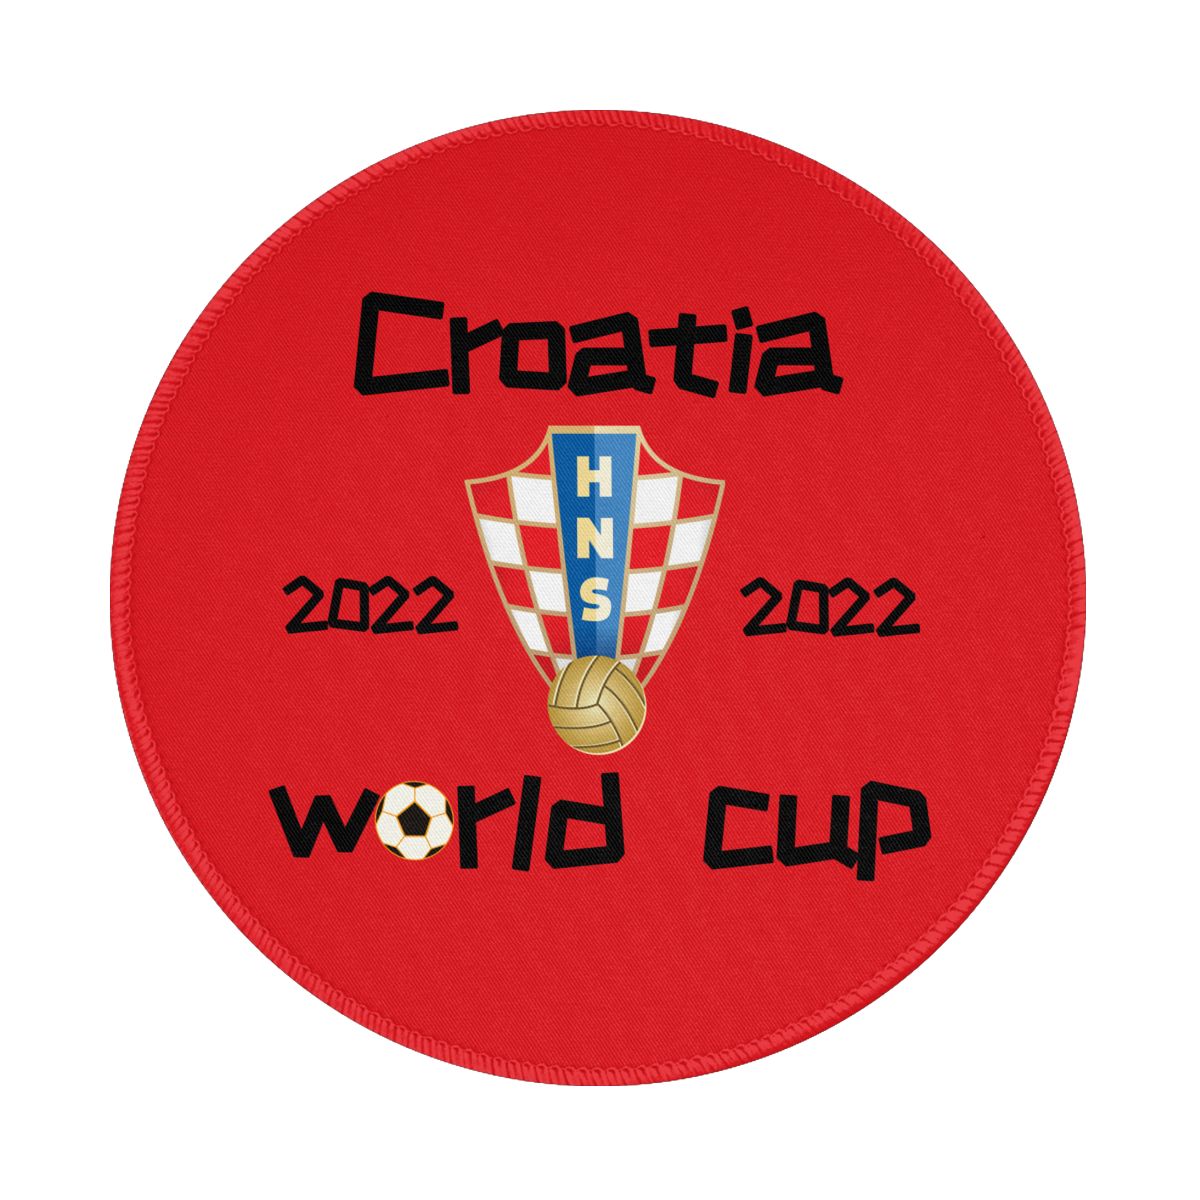 Croatia 2022 World Cup Team Logo Round Non-Slip Thick Rubber Modern Gaming Mousepad